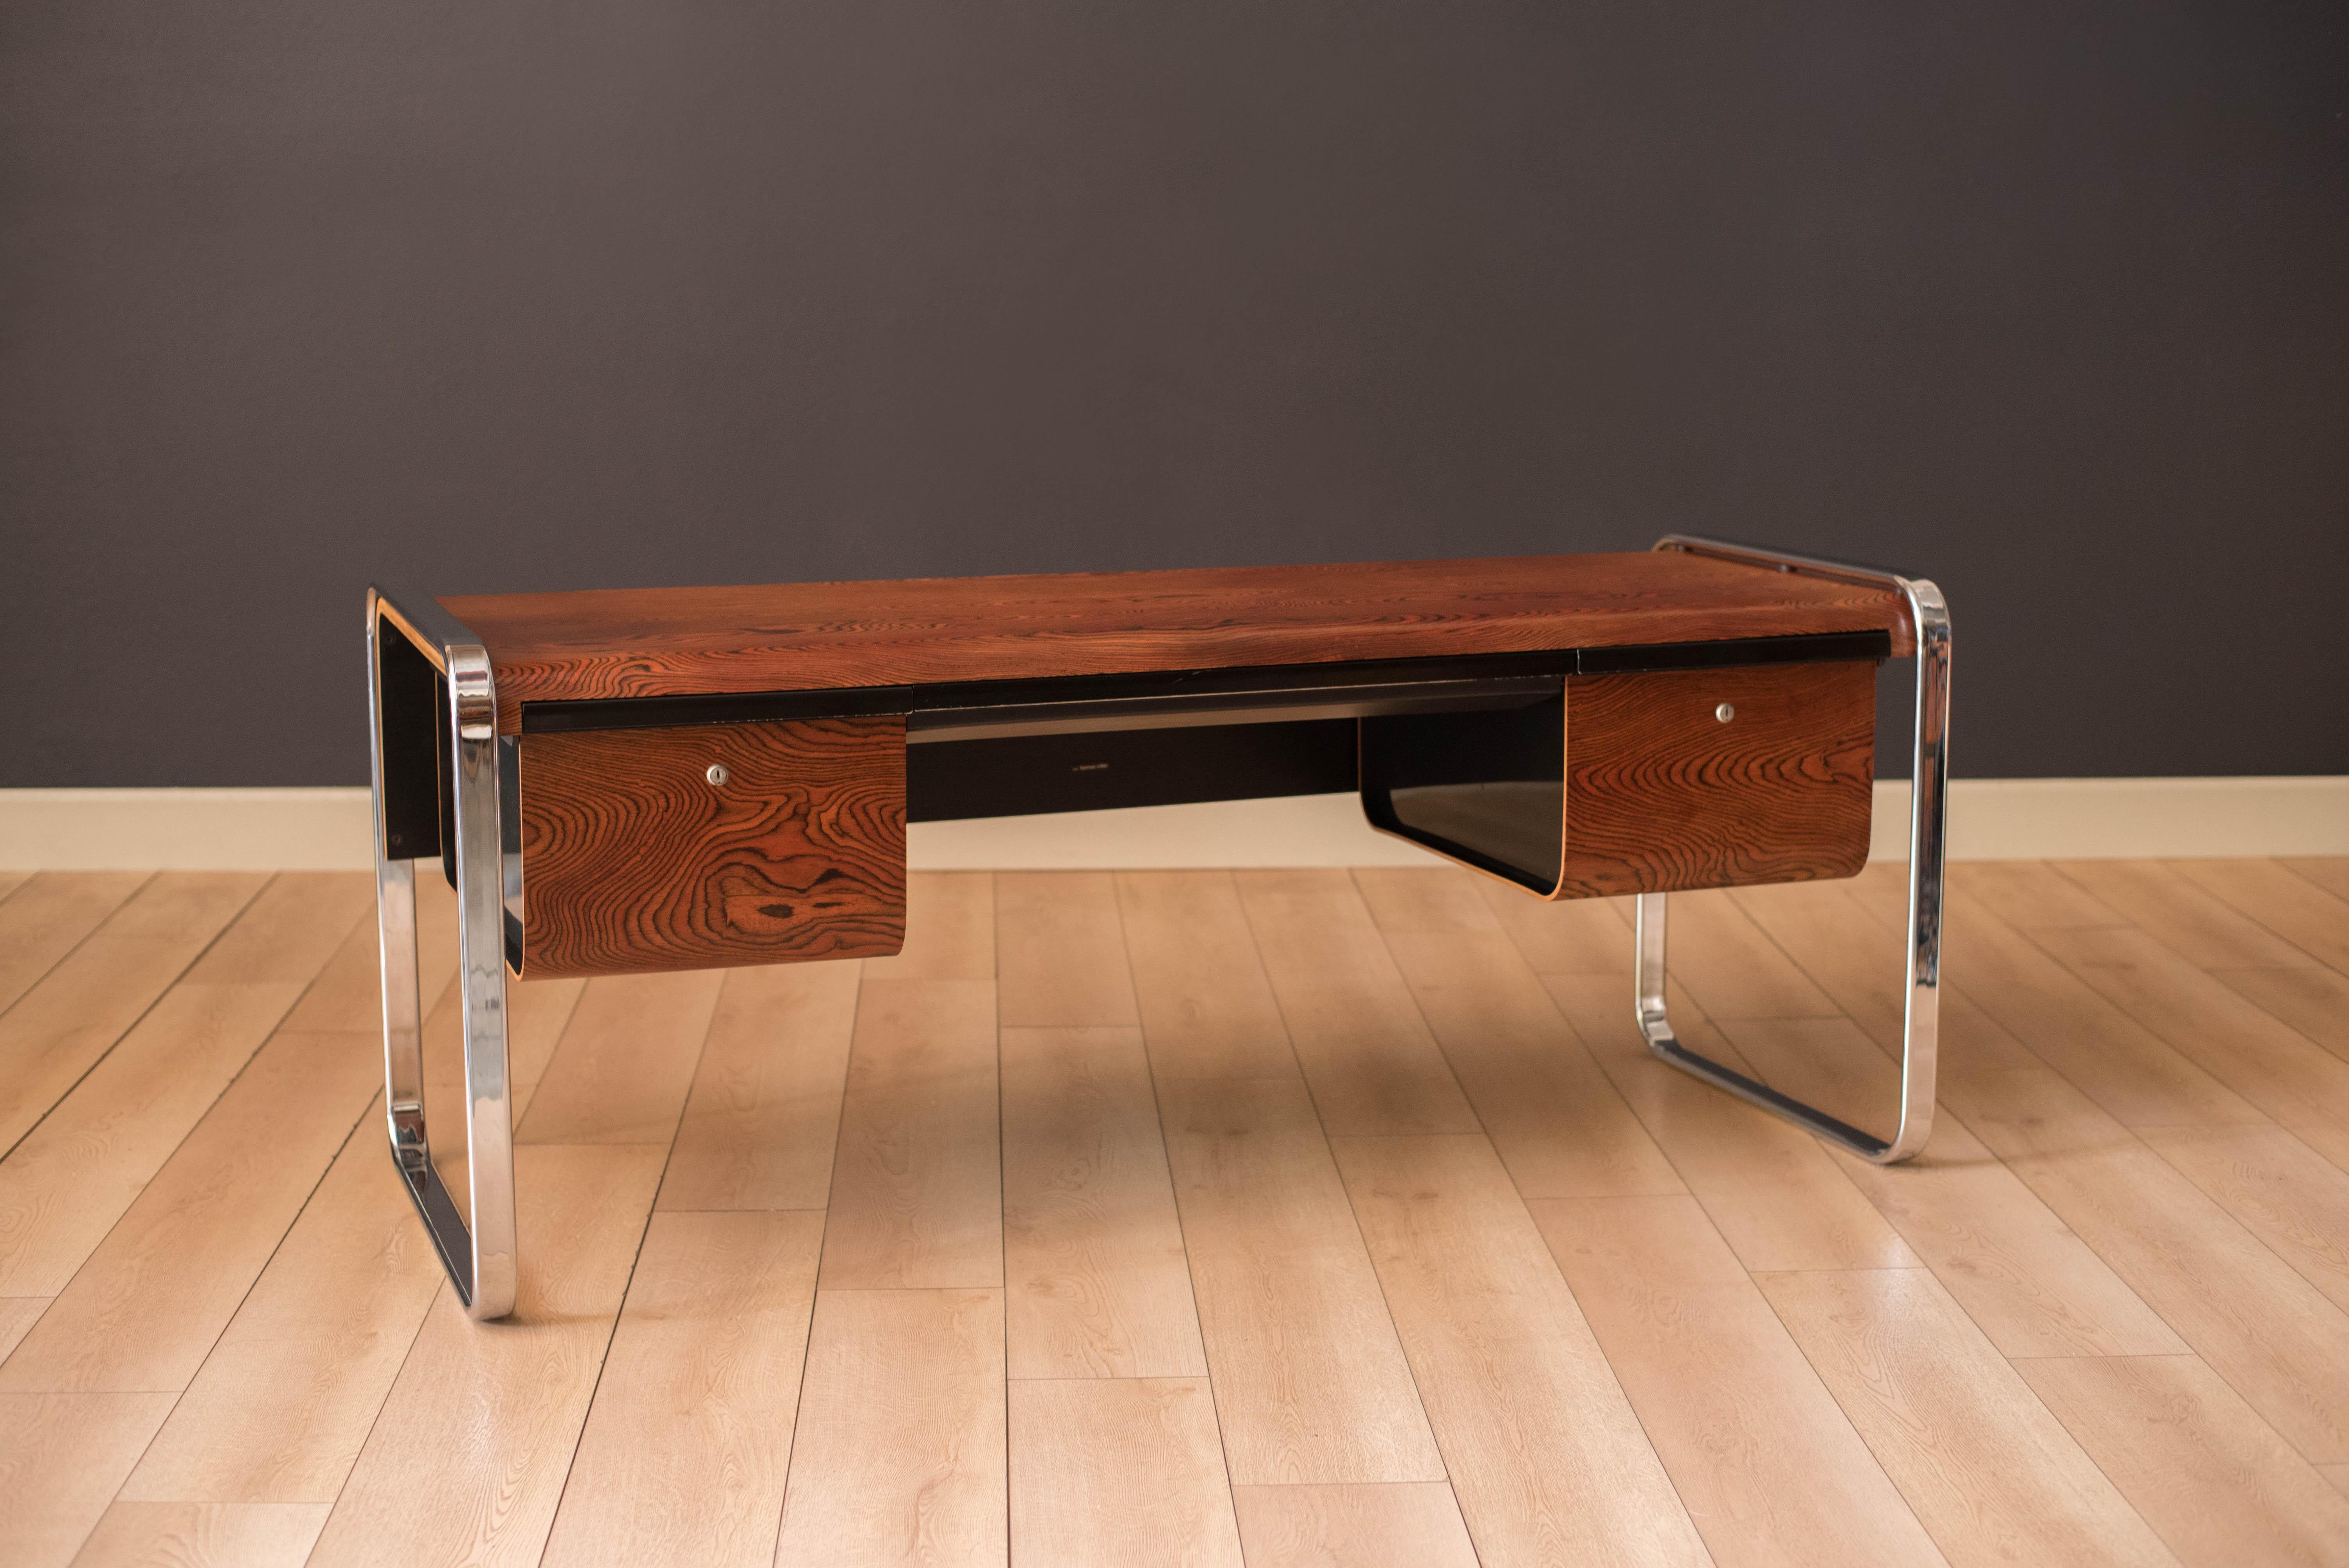 Details about   Best New Custom Rare Zebra Wood CEO Writing Desk Table Mid Century Modern Deco 